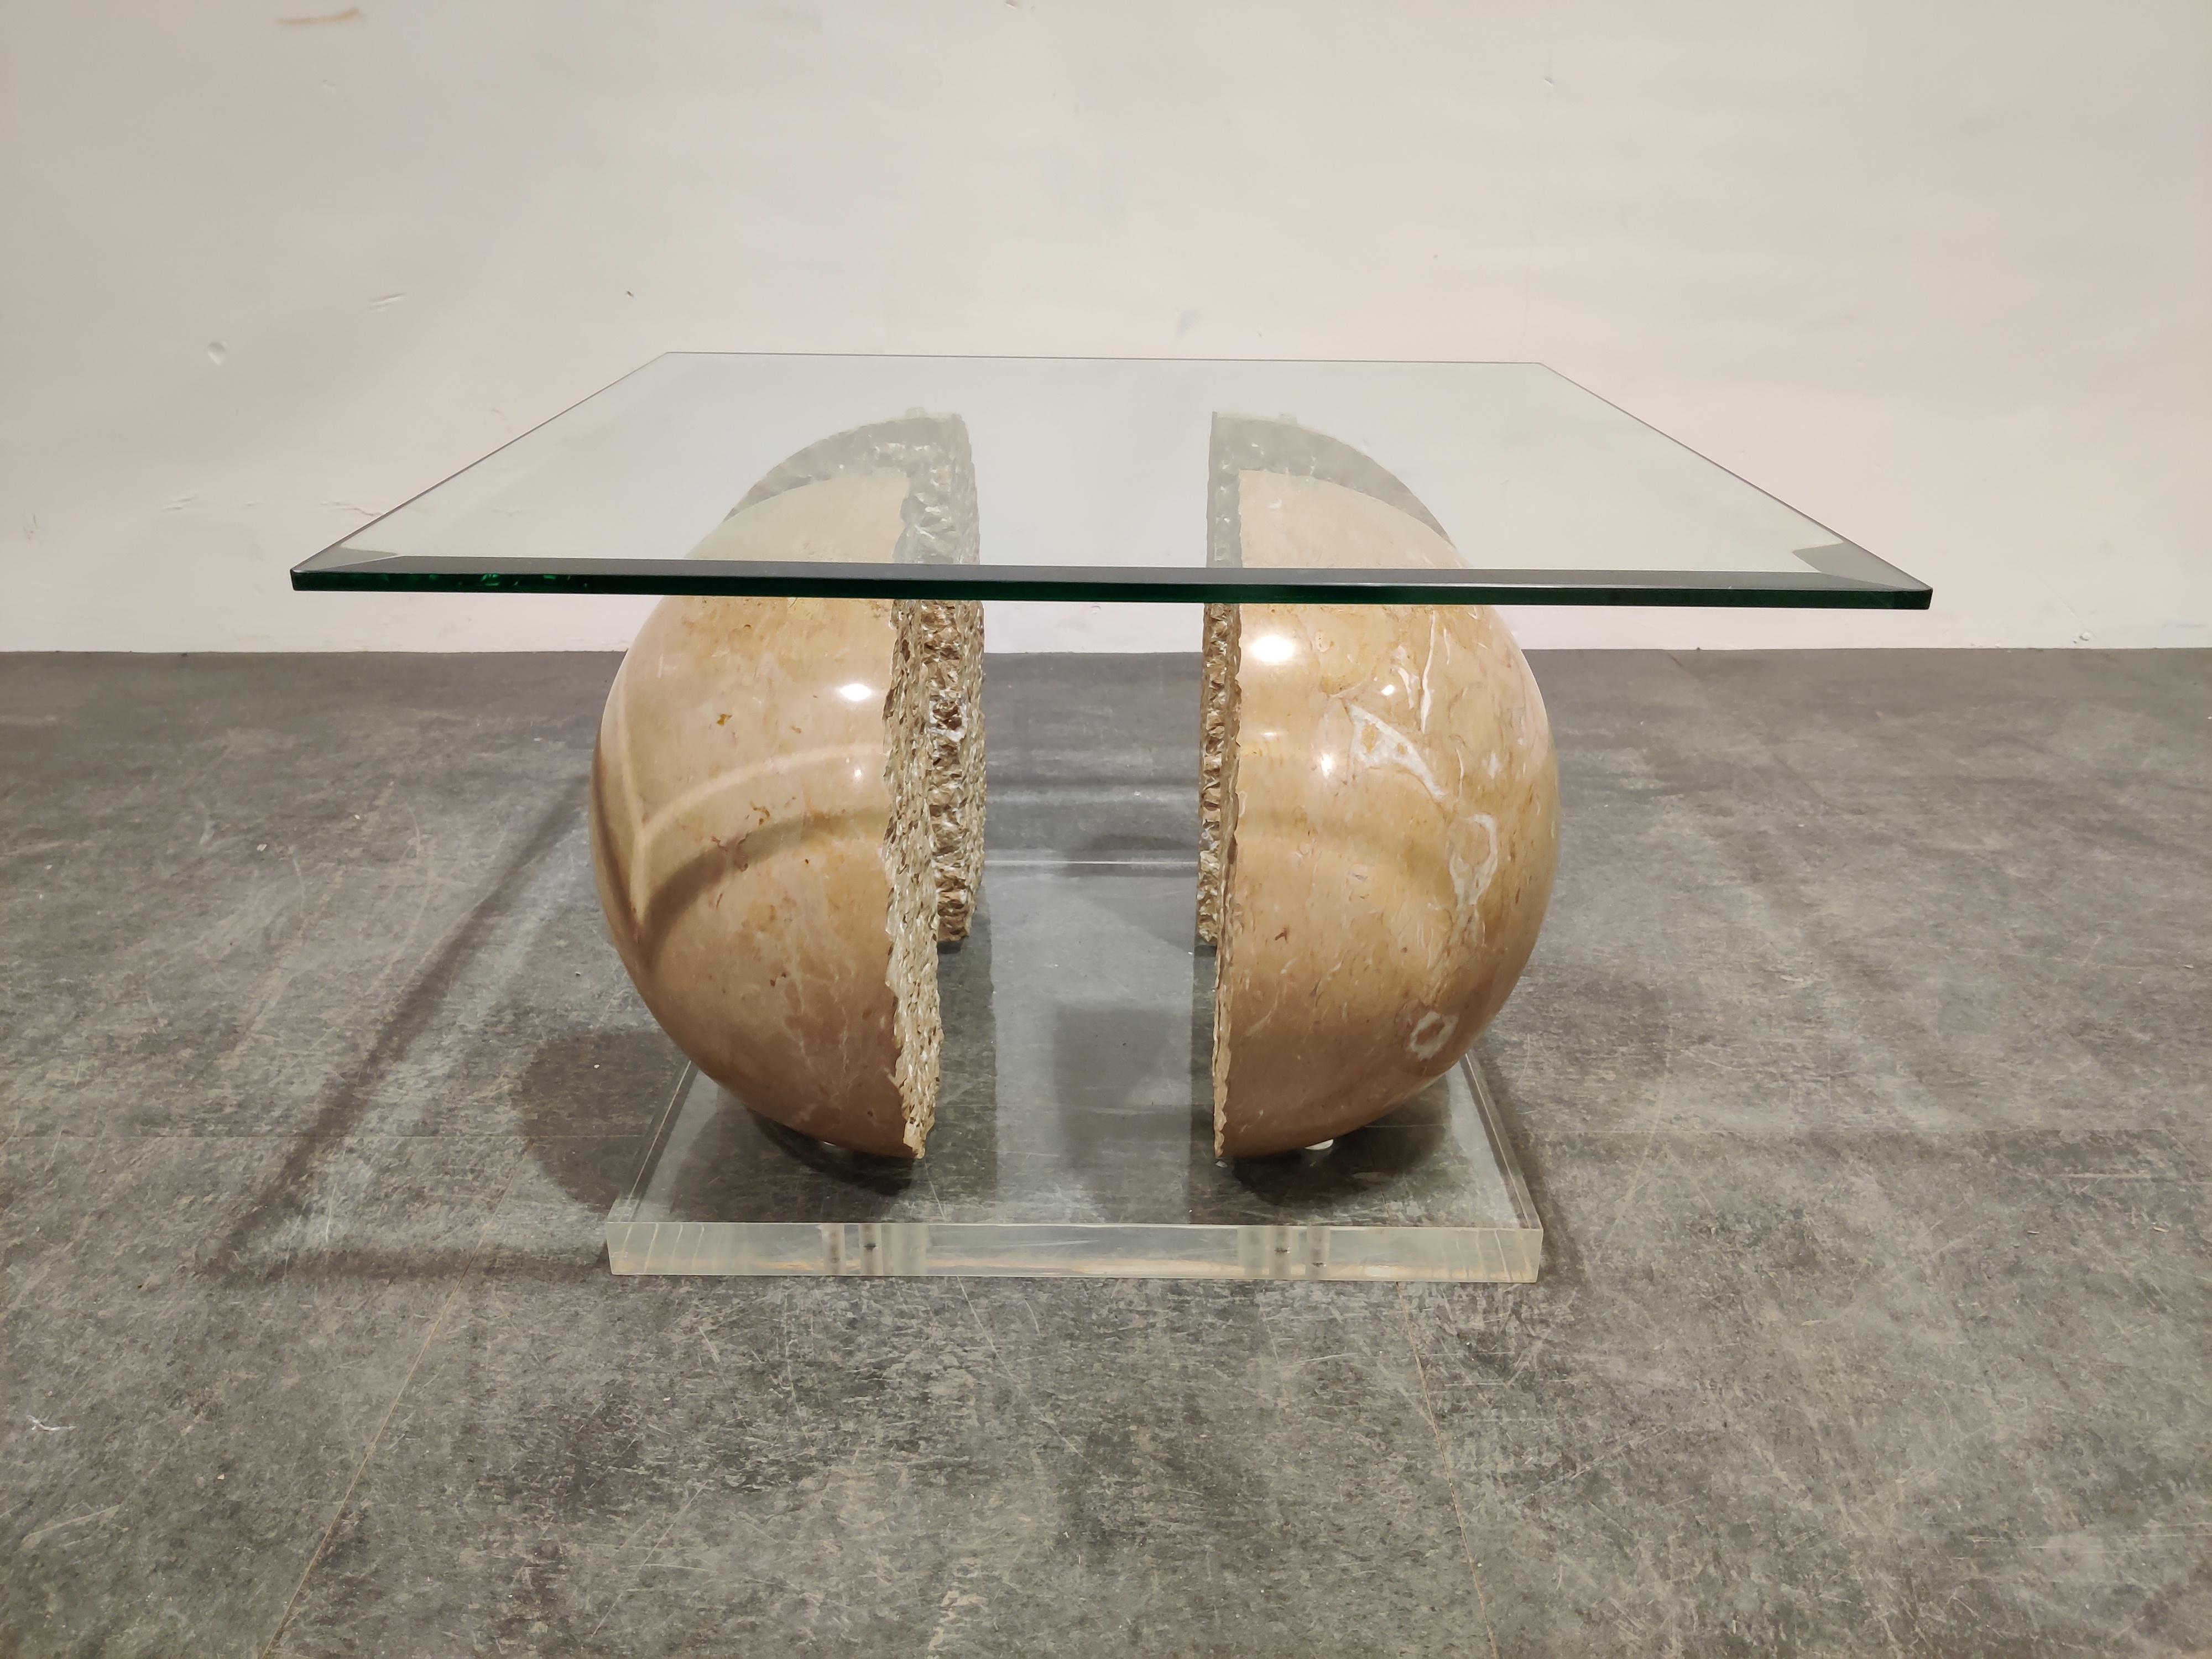 Intruiging coffee table consisting of a 'split' marble sphere center piece mounted on a lucite base and with a clear glass top. 

Unique design with a timeless look.

Good condition,

1970s, Italy

Measures: Height: 37cm/14.56